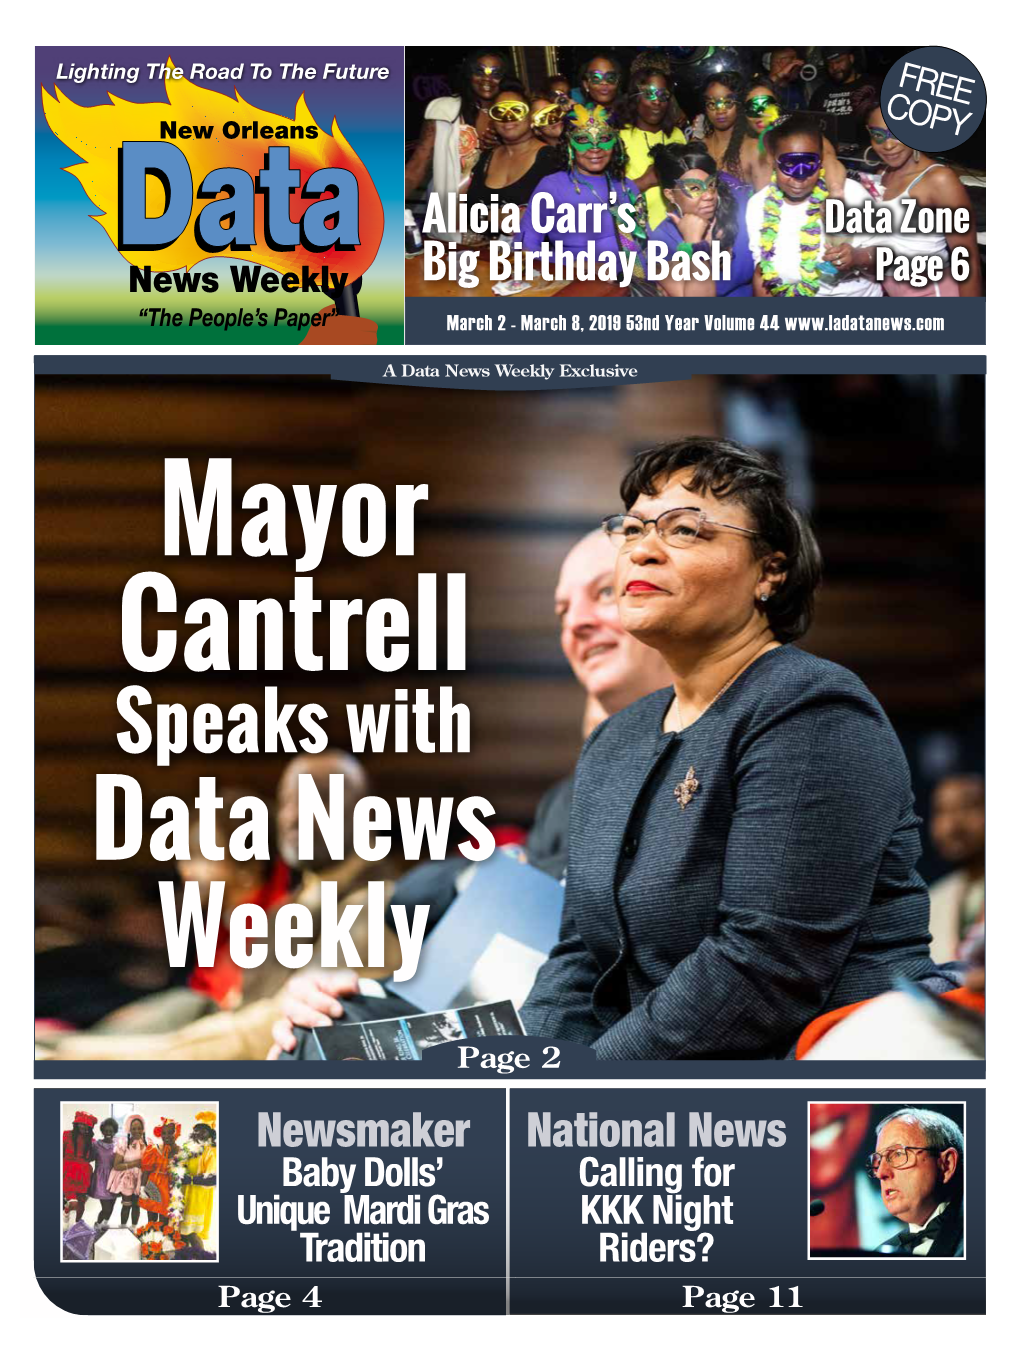 Speaks with Data News Weekly